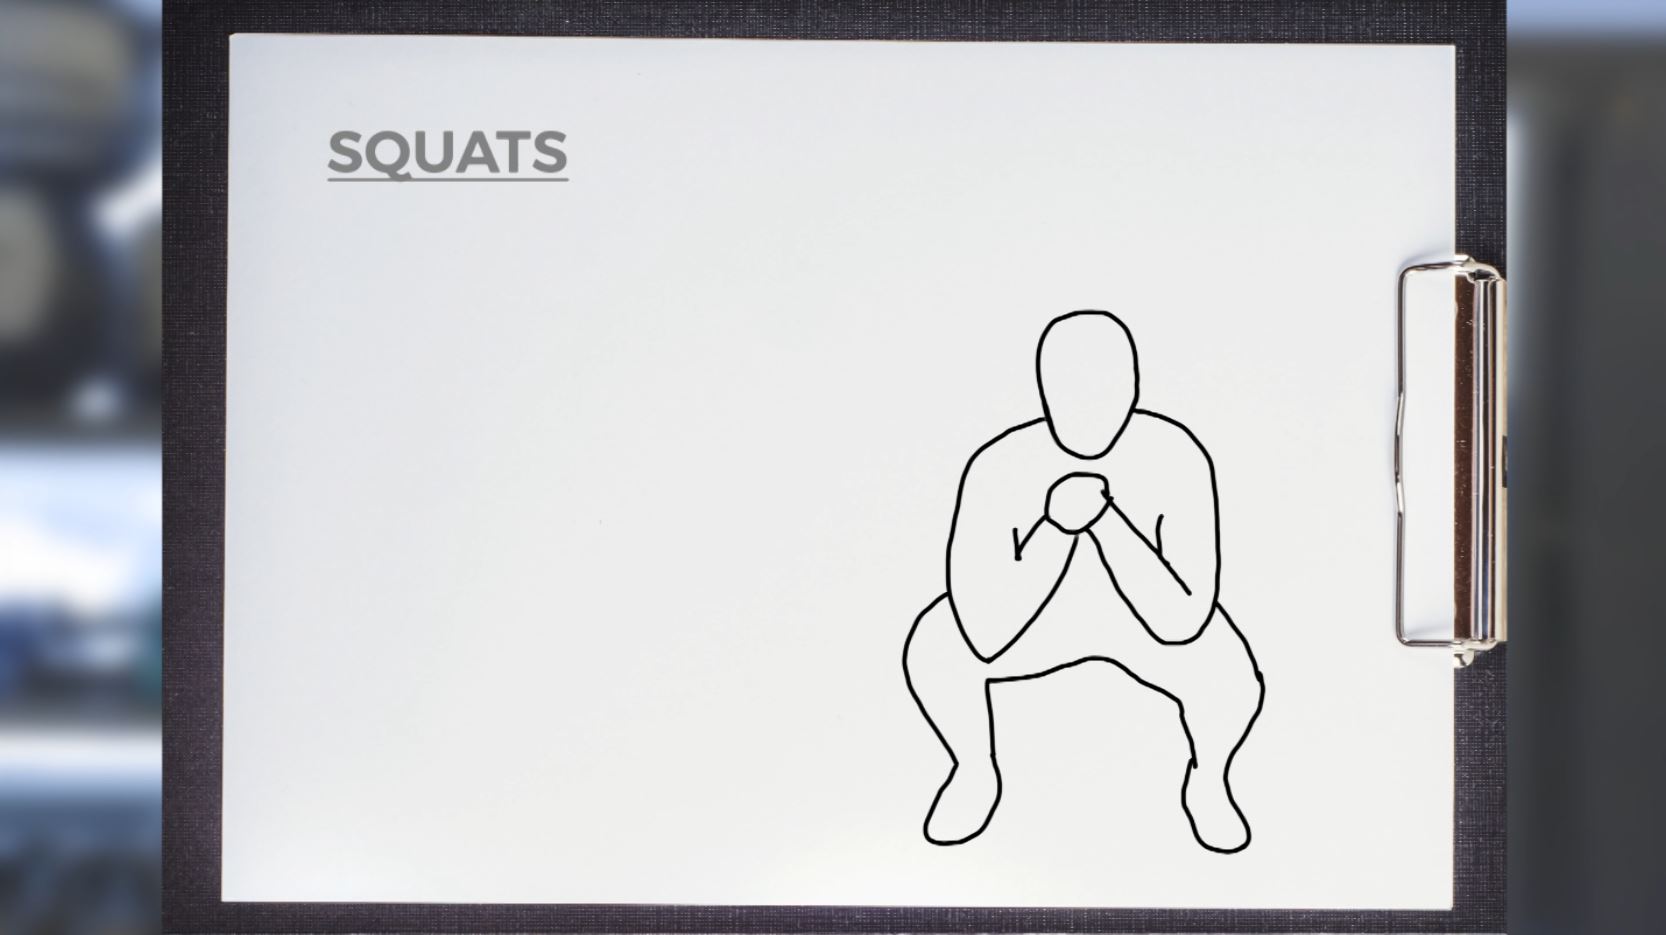 A sketch of someone squatting